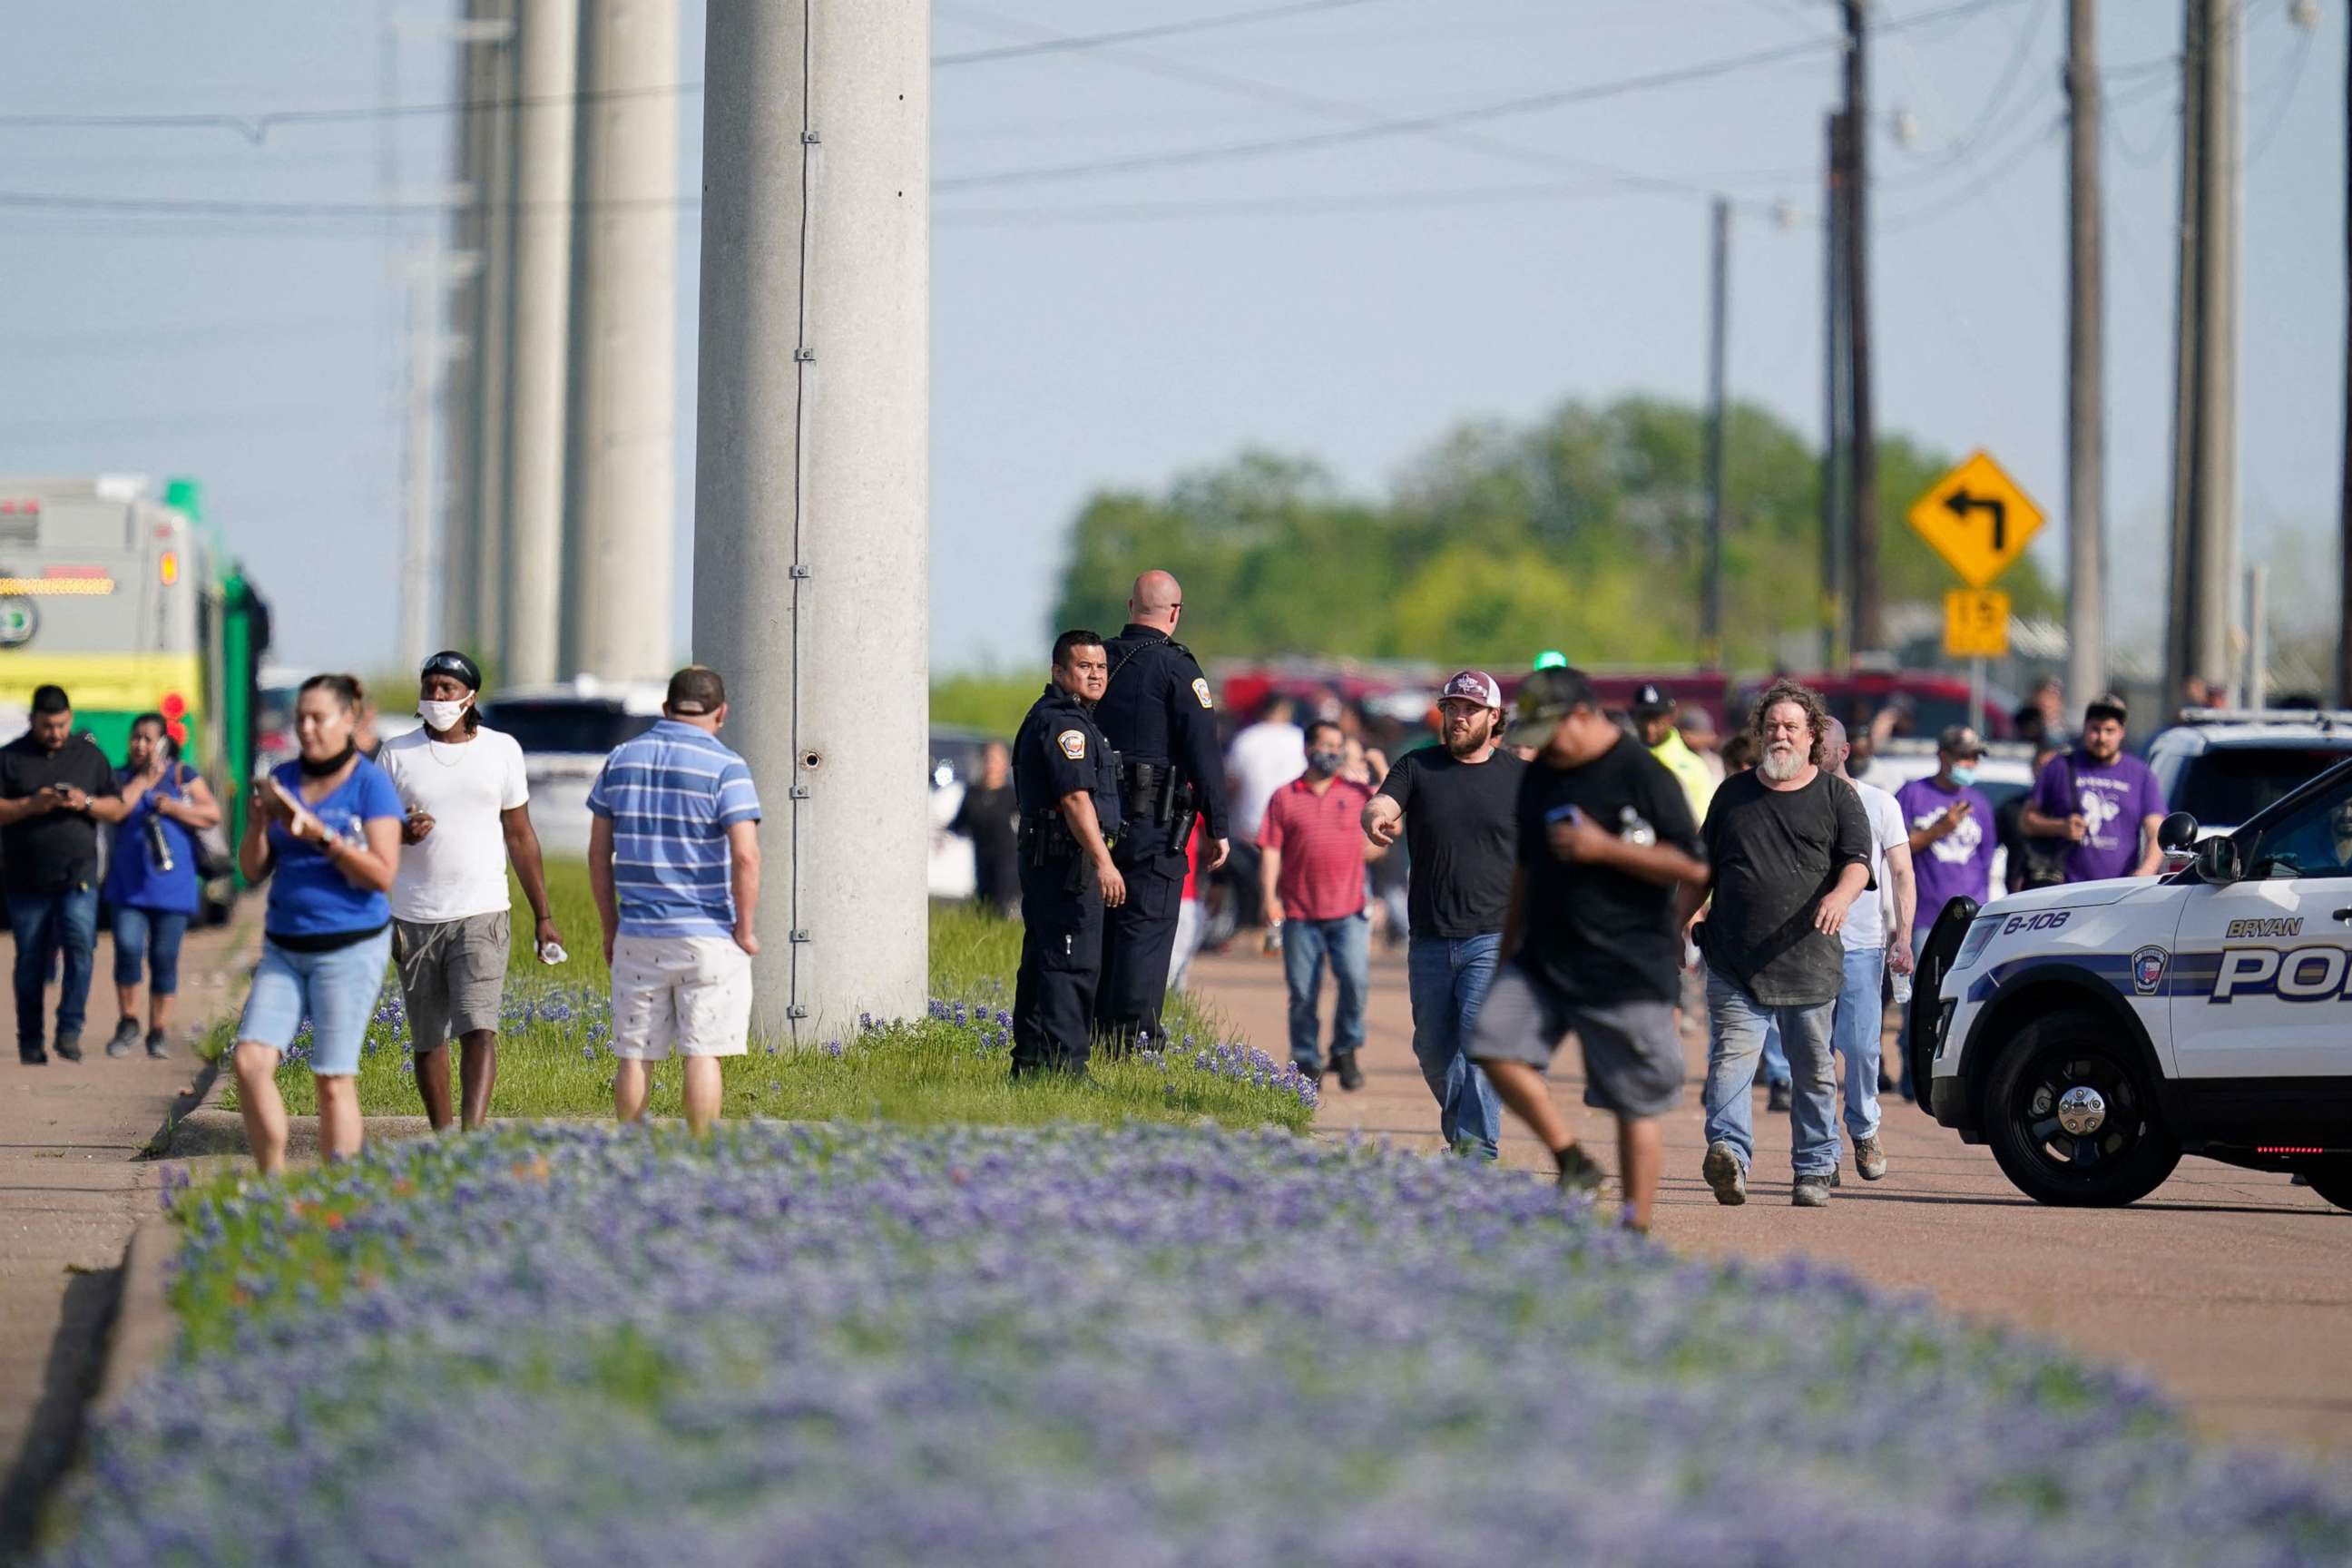 PHOTO: Bryan police officers direct workers away from the scene of a mass shooting at an industrial park in Bryan, Texas, April 8, 2021.